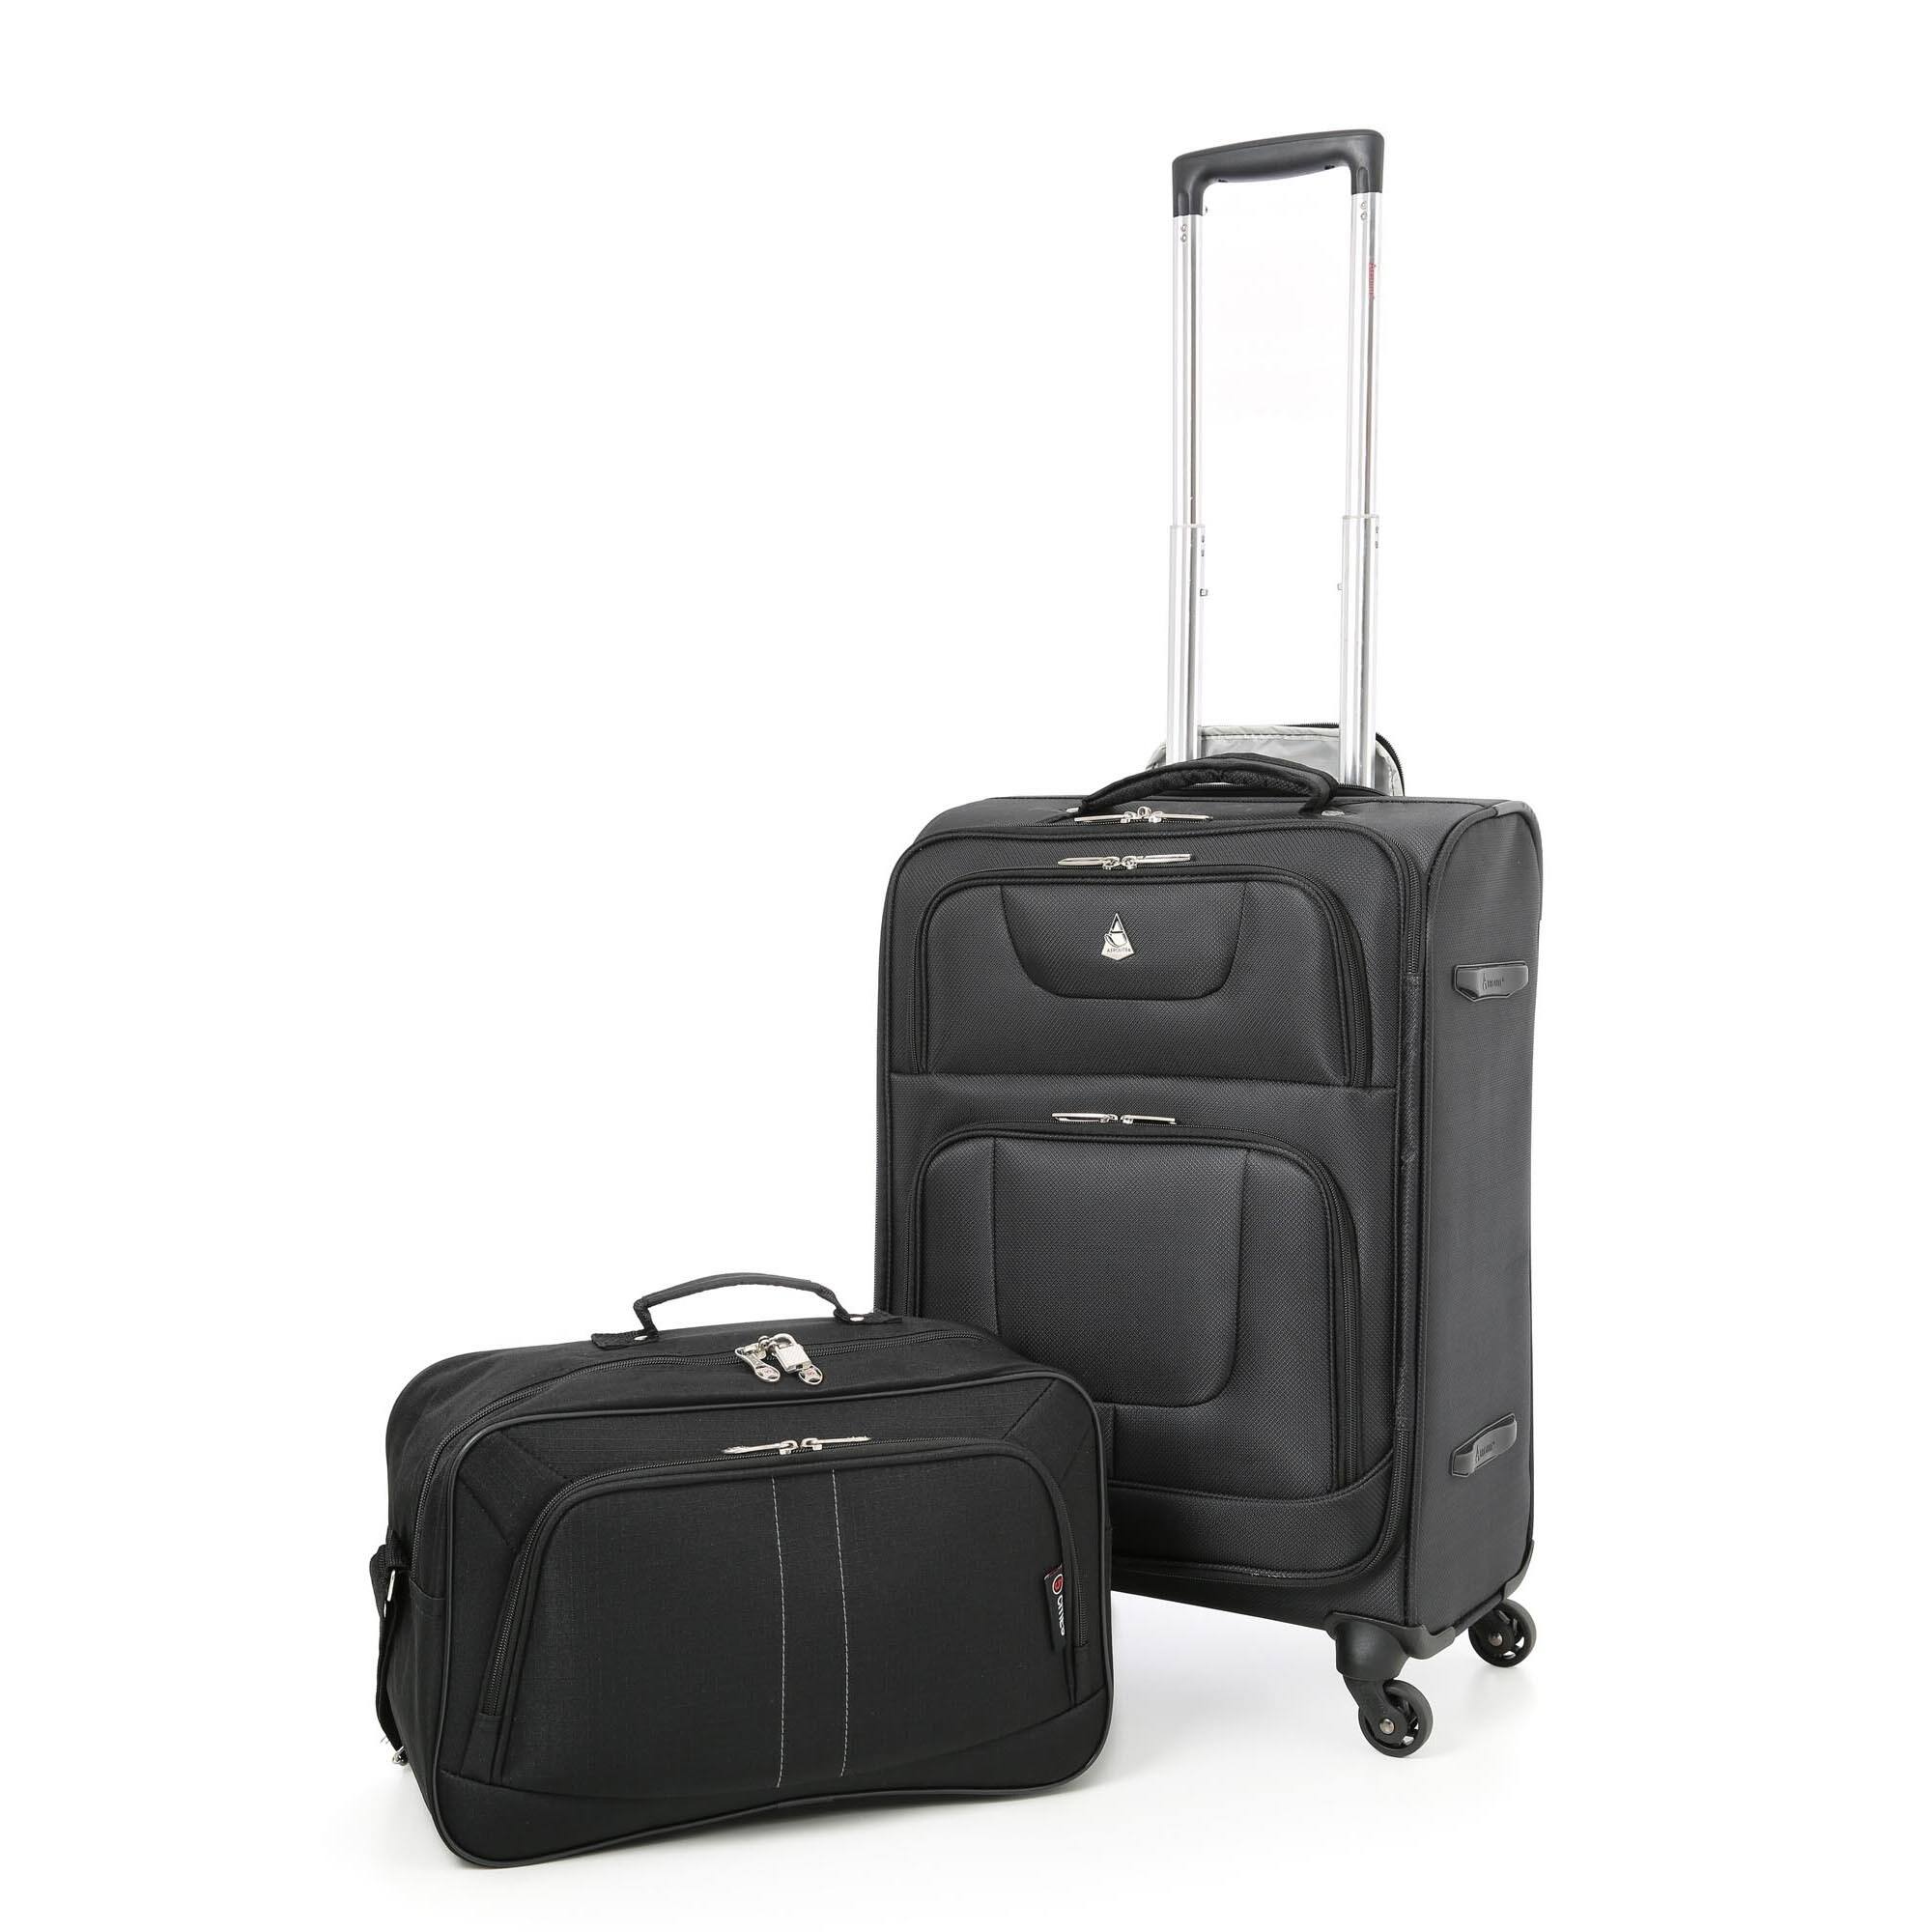 Buy Carry On Upright Luggage Online at www.semadata.org | Our Best Carry On Luggage Deals